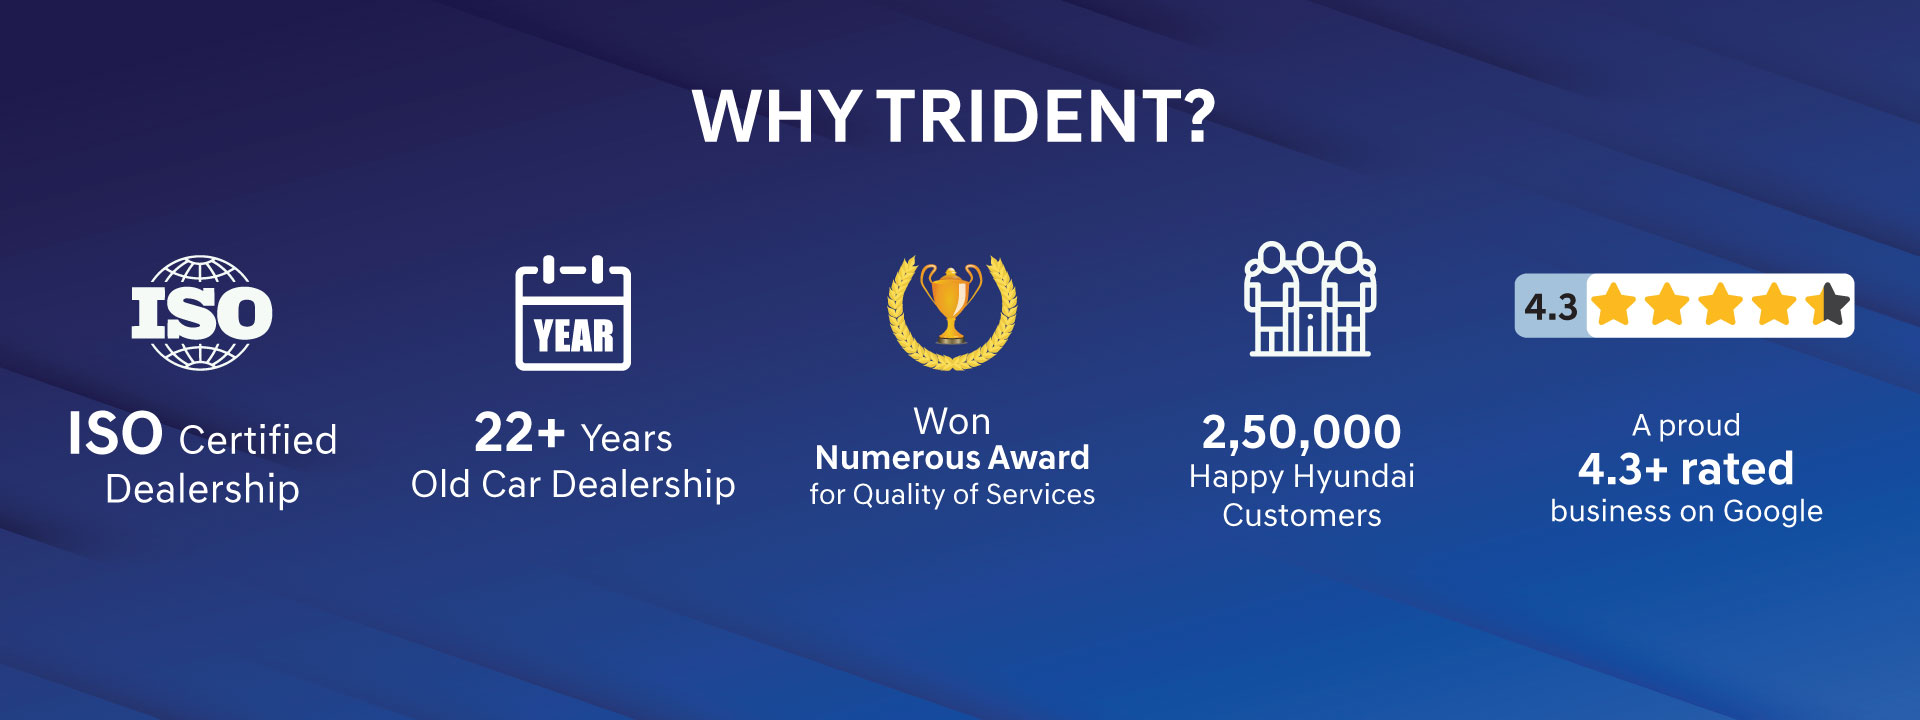 Why trident